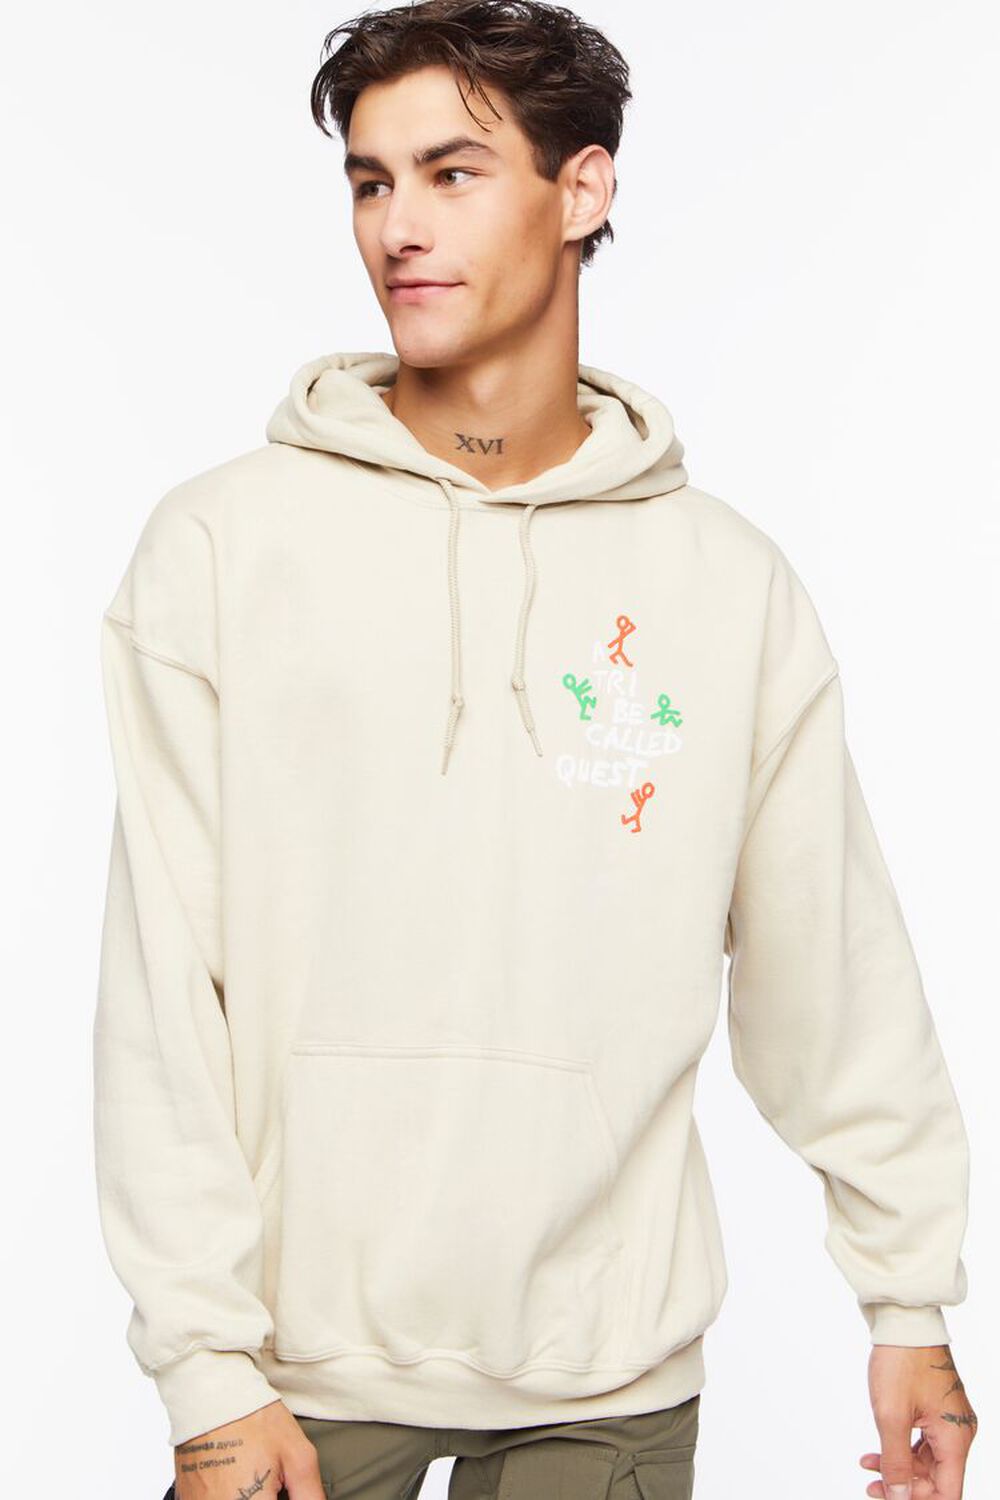 SAND/MULTI A Tribe Called Quest Graphic Hoodie, image 1